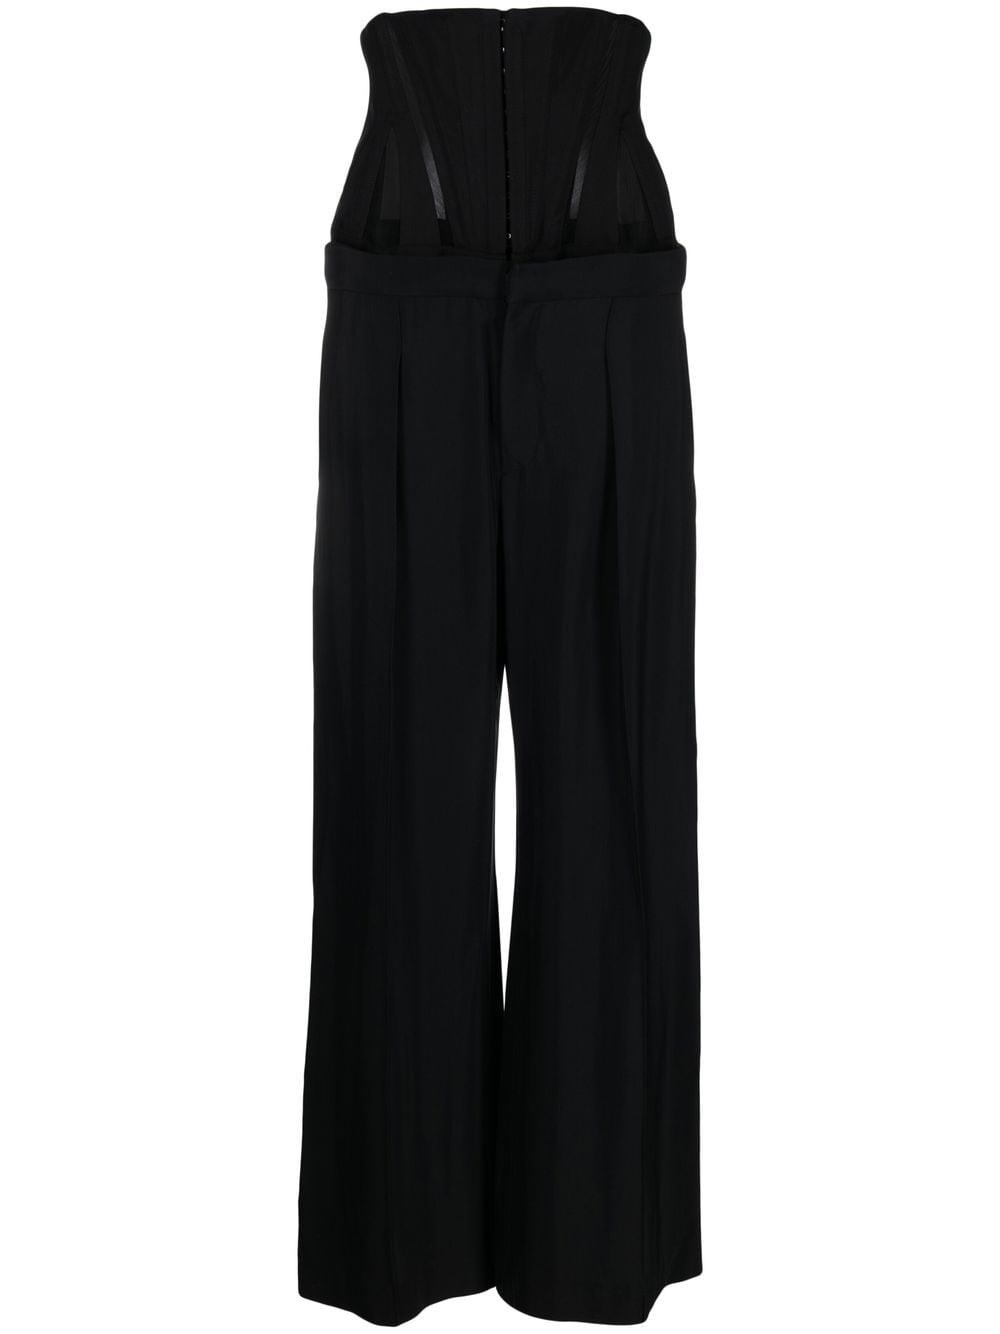 MUGLER WIDE LEG TROUSERS WITH CORSET DETAIL